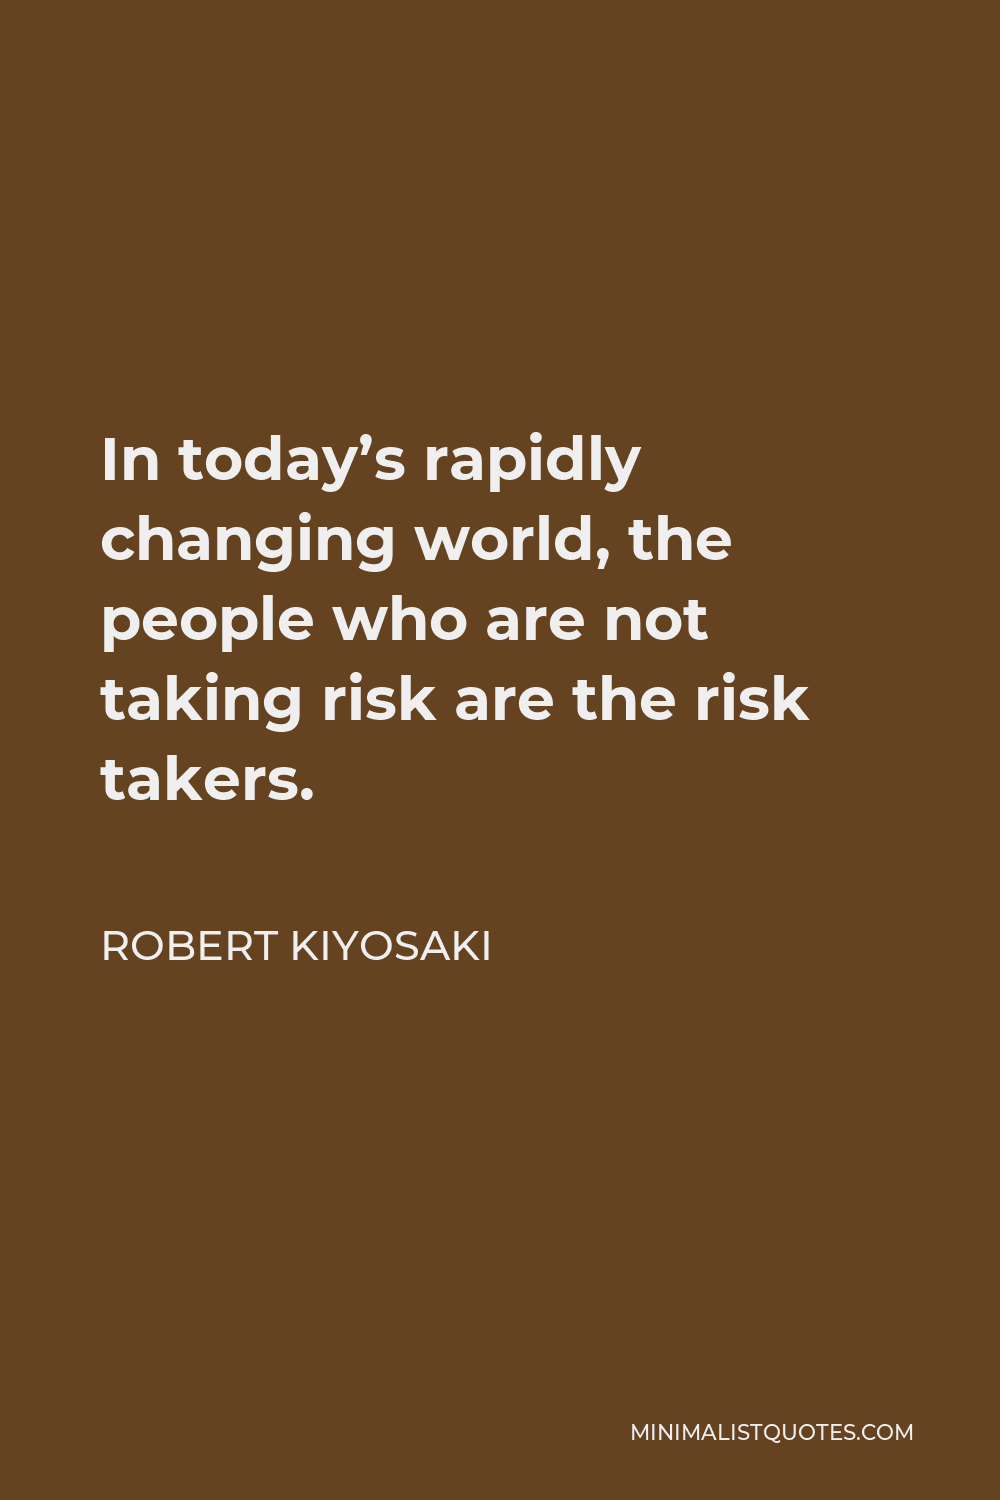 Robert Kiyosaki Quote - In today’s rapidly changing world, the people who are not taking risk are the risk takers.